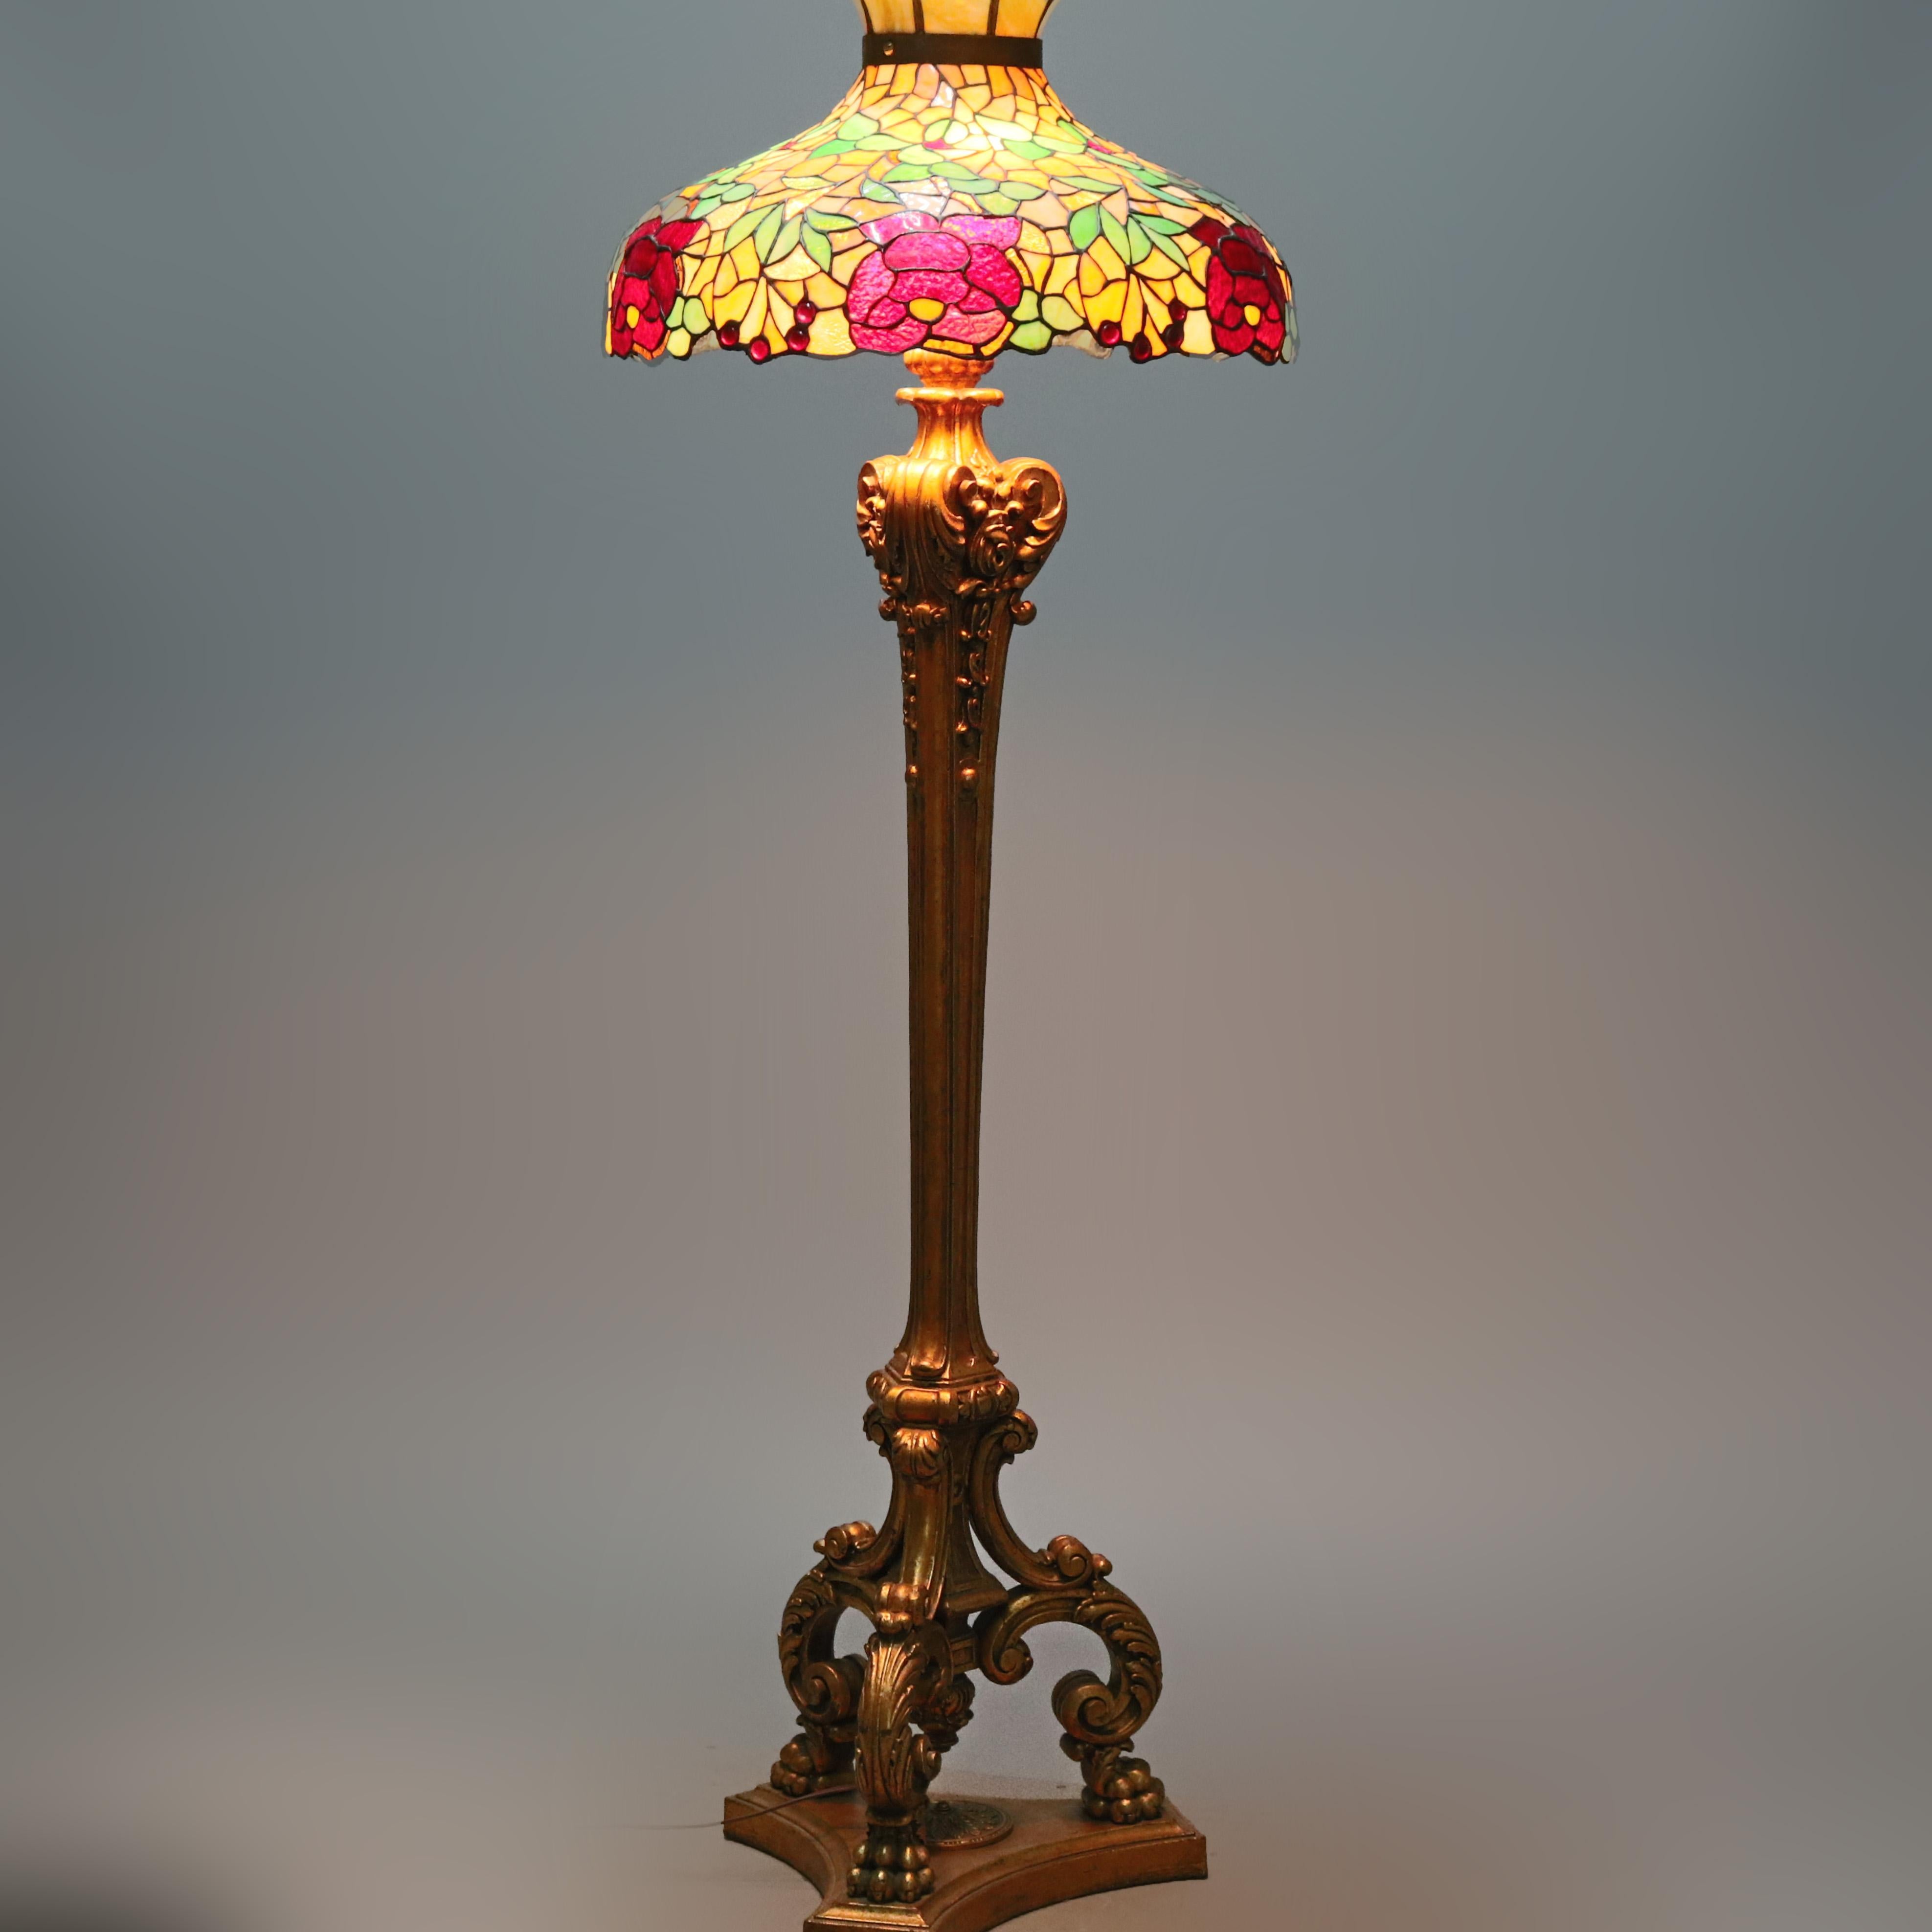 An antique mosaic floor lamp in the manner of Duffner & Kimberley, New York offers domed leaded stained with fiery glass, slag and jeweled glass shade with foliate, floral and cherry motif surmounting bronzed cast triple socket base having flared